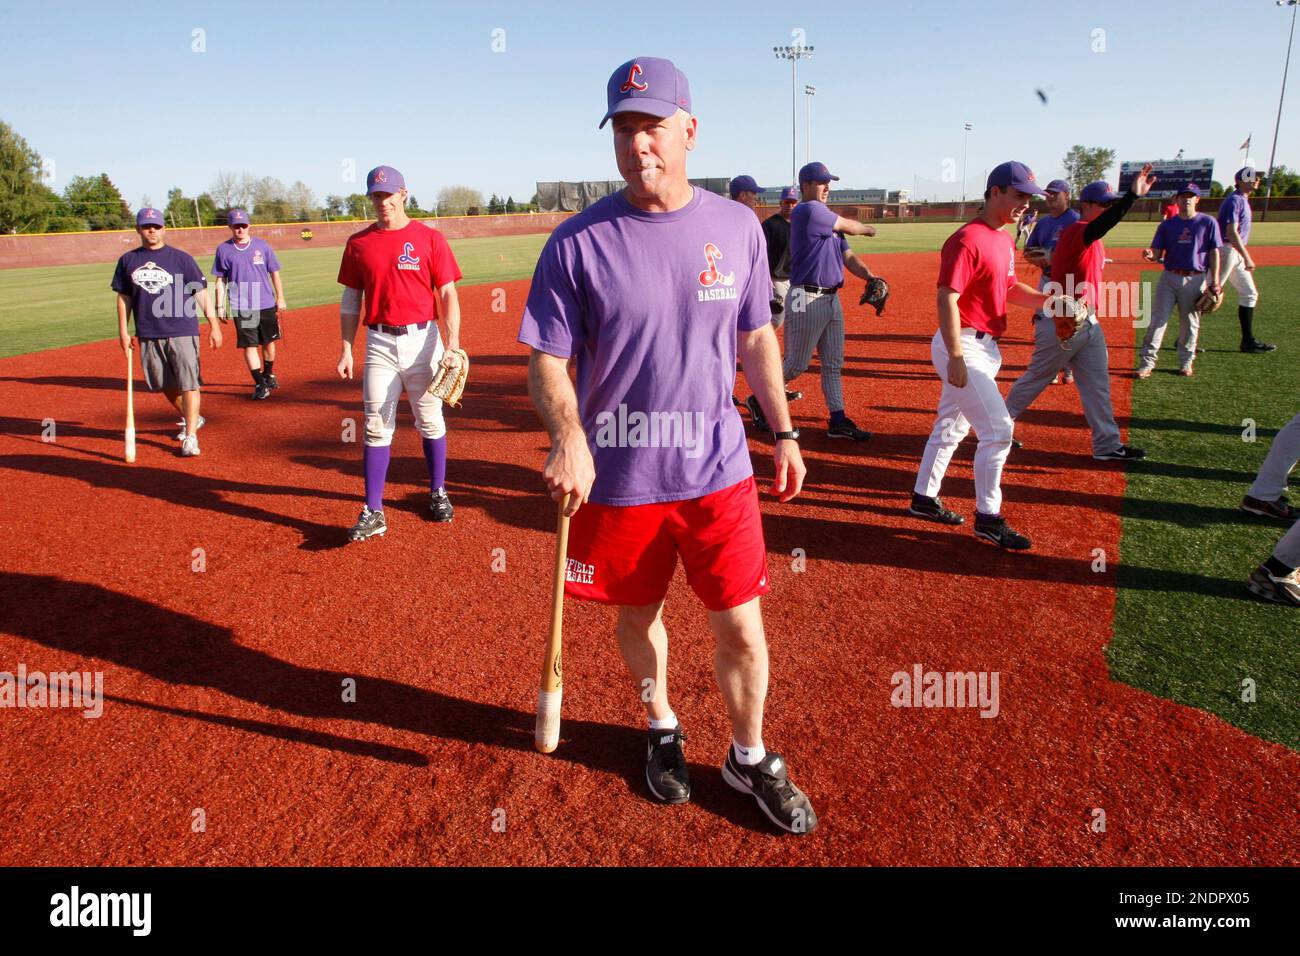 Linfield baseball coach Scott Brosius throws during batting practice with  his team Friday, May 14, 2010, in McMinnville, Ore. Former Yankee Scott  Brosius is now Coach Brosius, guiding the baseball team of